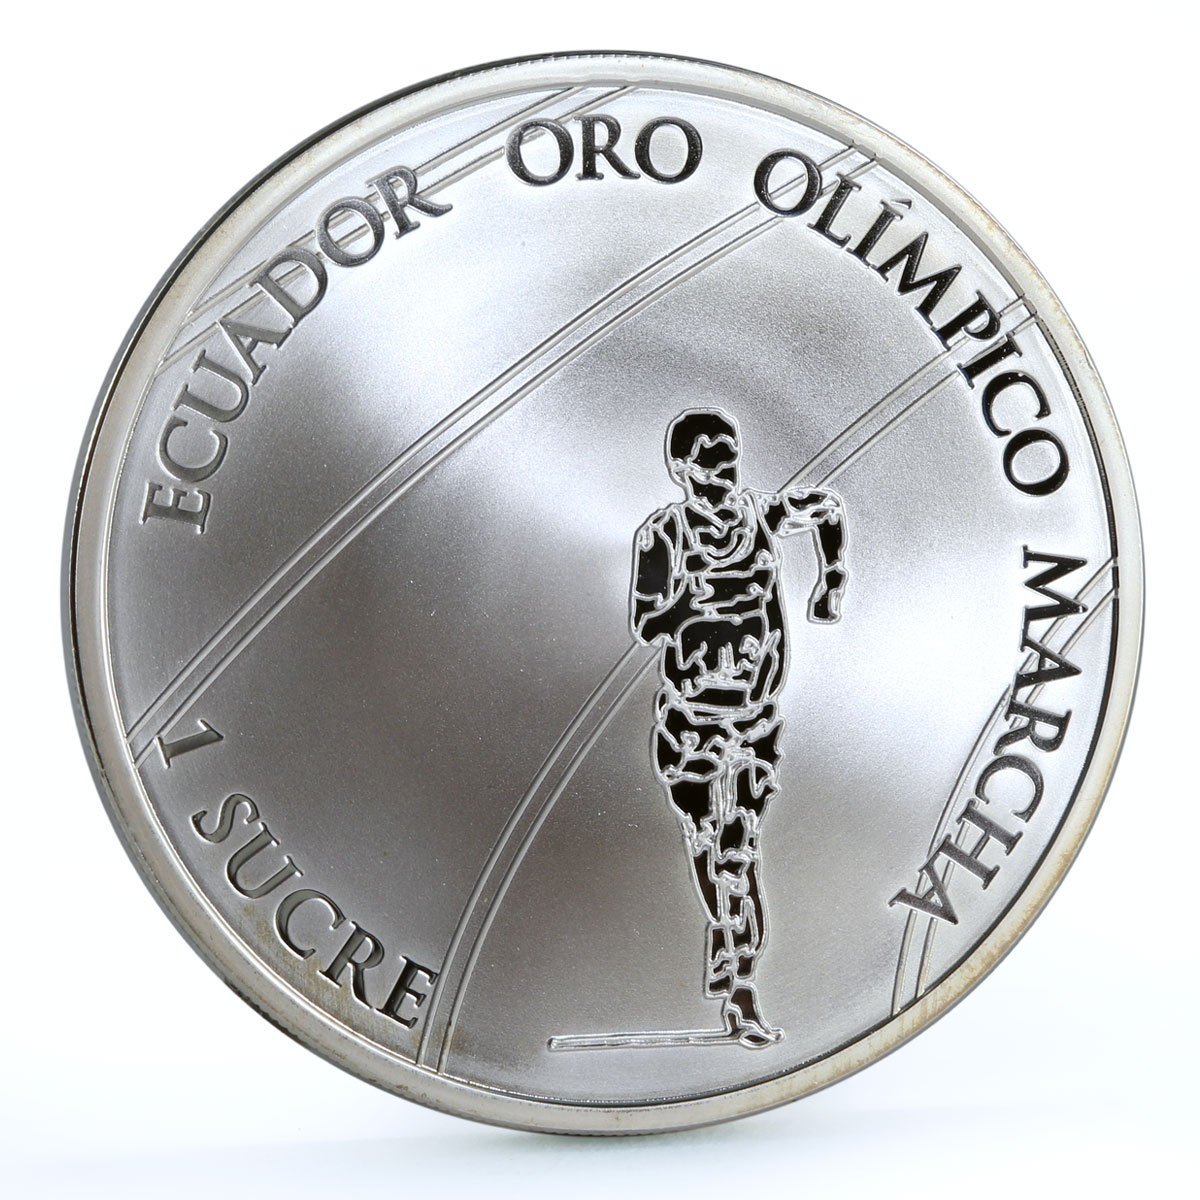 Ecuador 1 sucre Olympic Games Race Walking Sportsman proof silver coin 2007